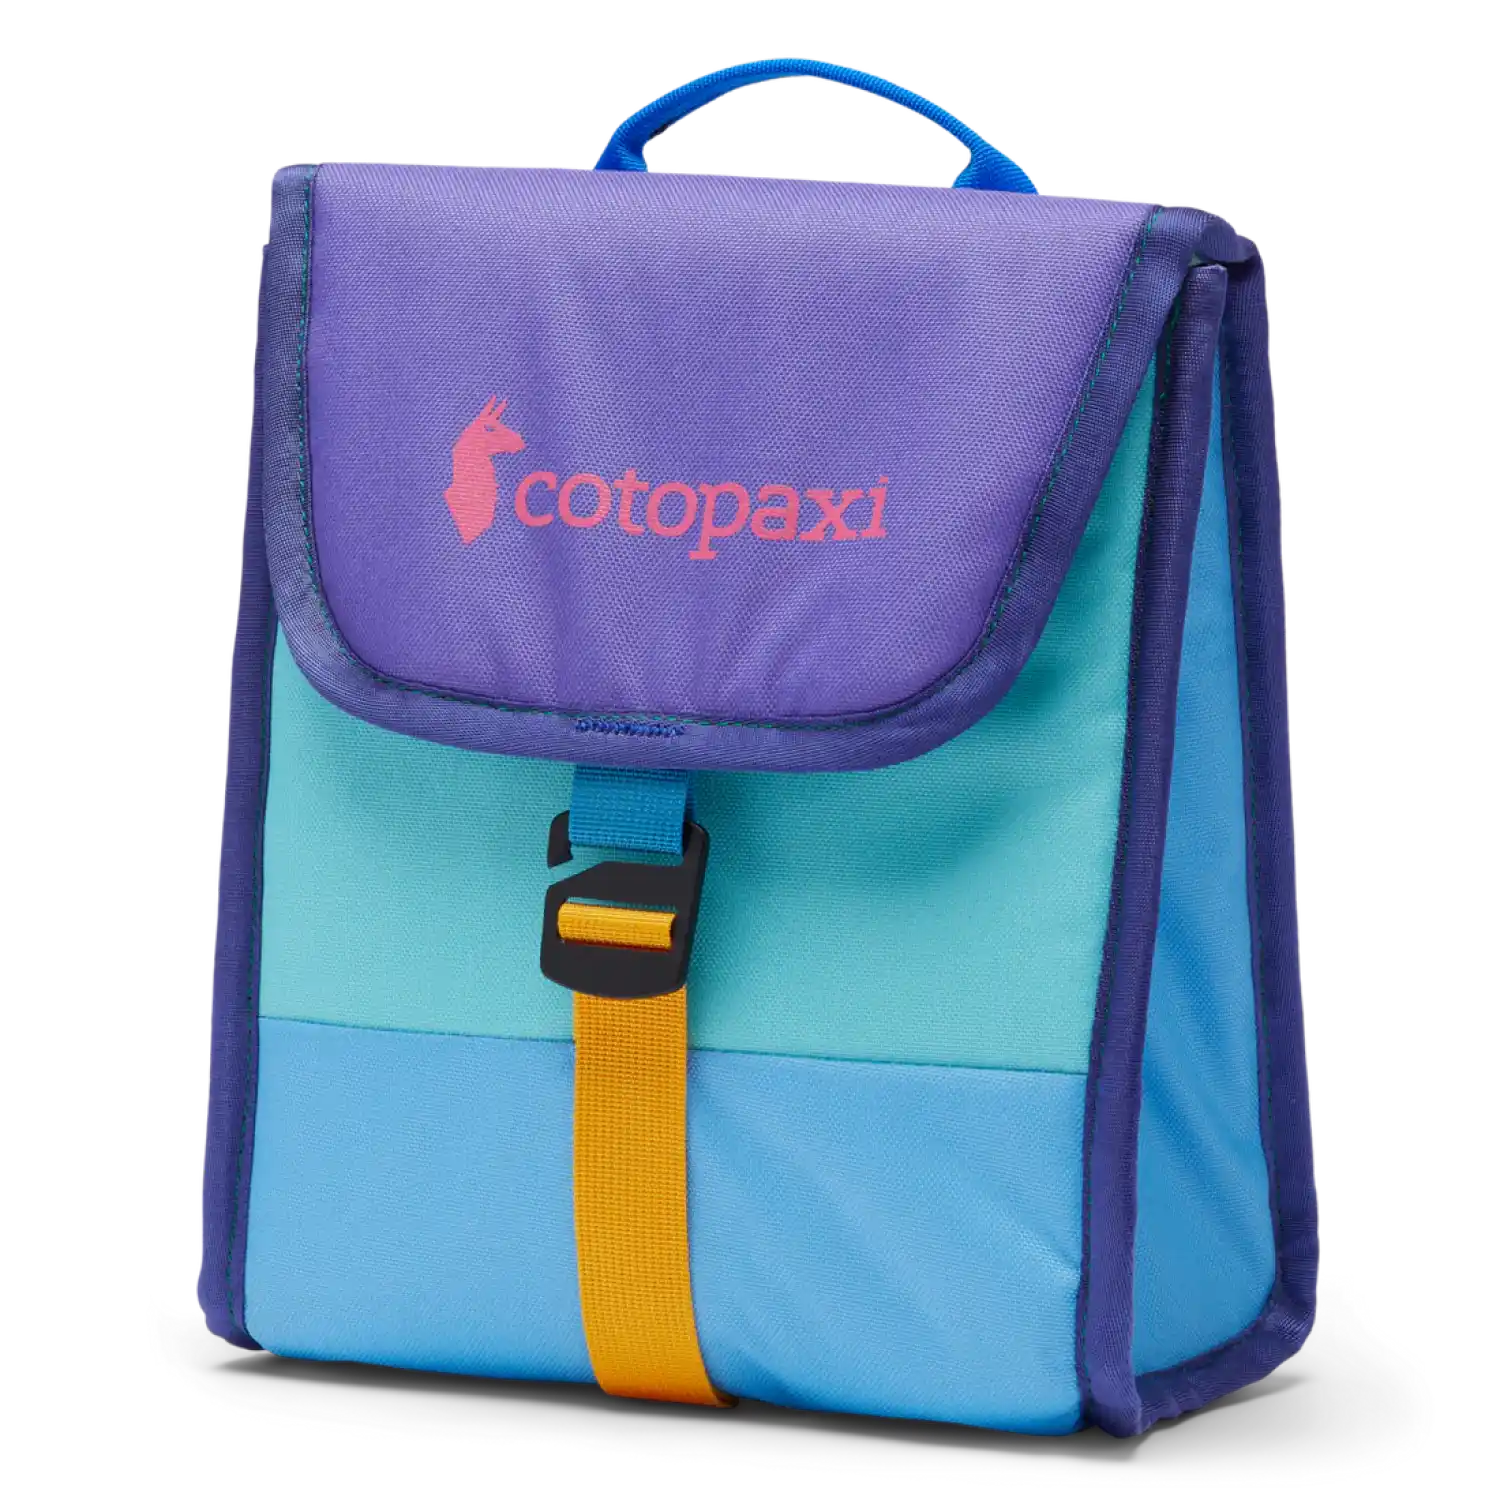 Cotopaxi Botana 6L Lunch Bag, Del Dia, front and side view 